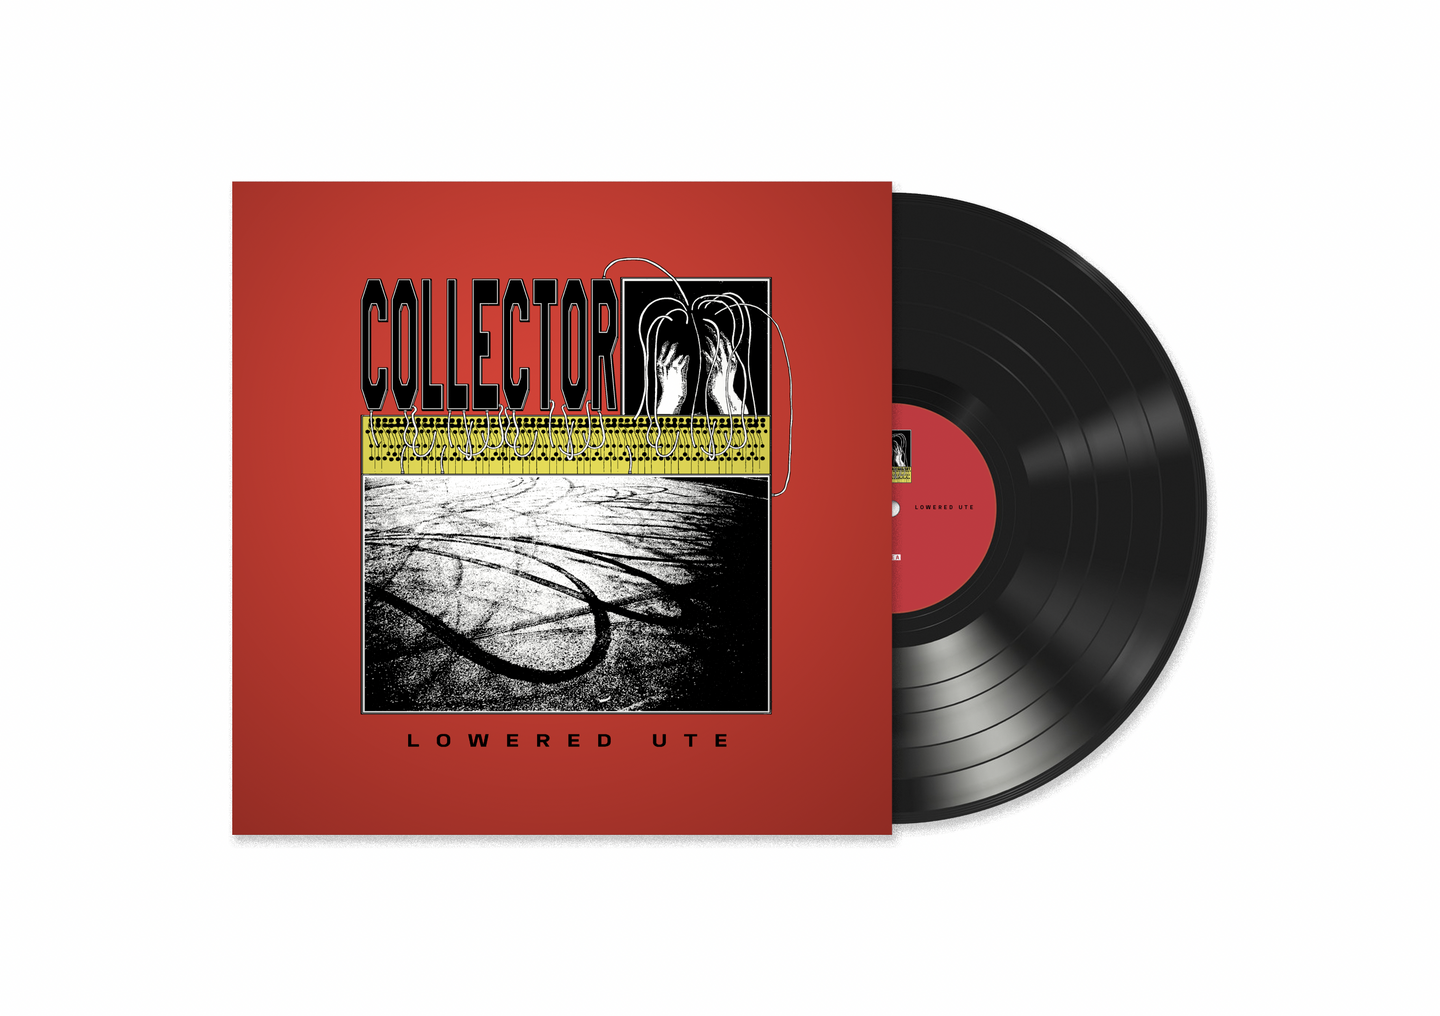 COLLECTOR - LOWERED UTE LP